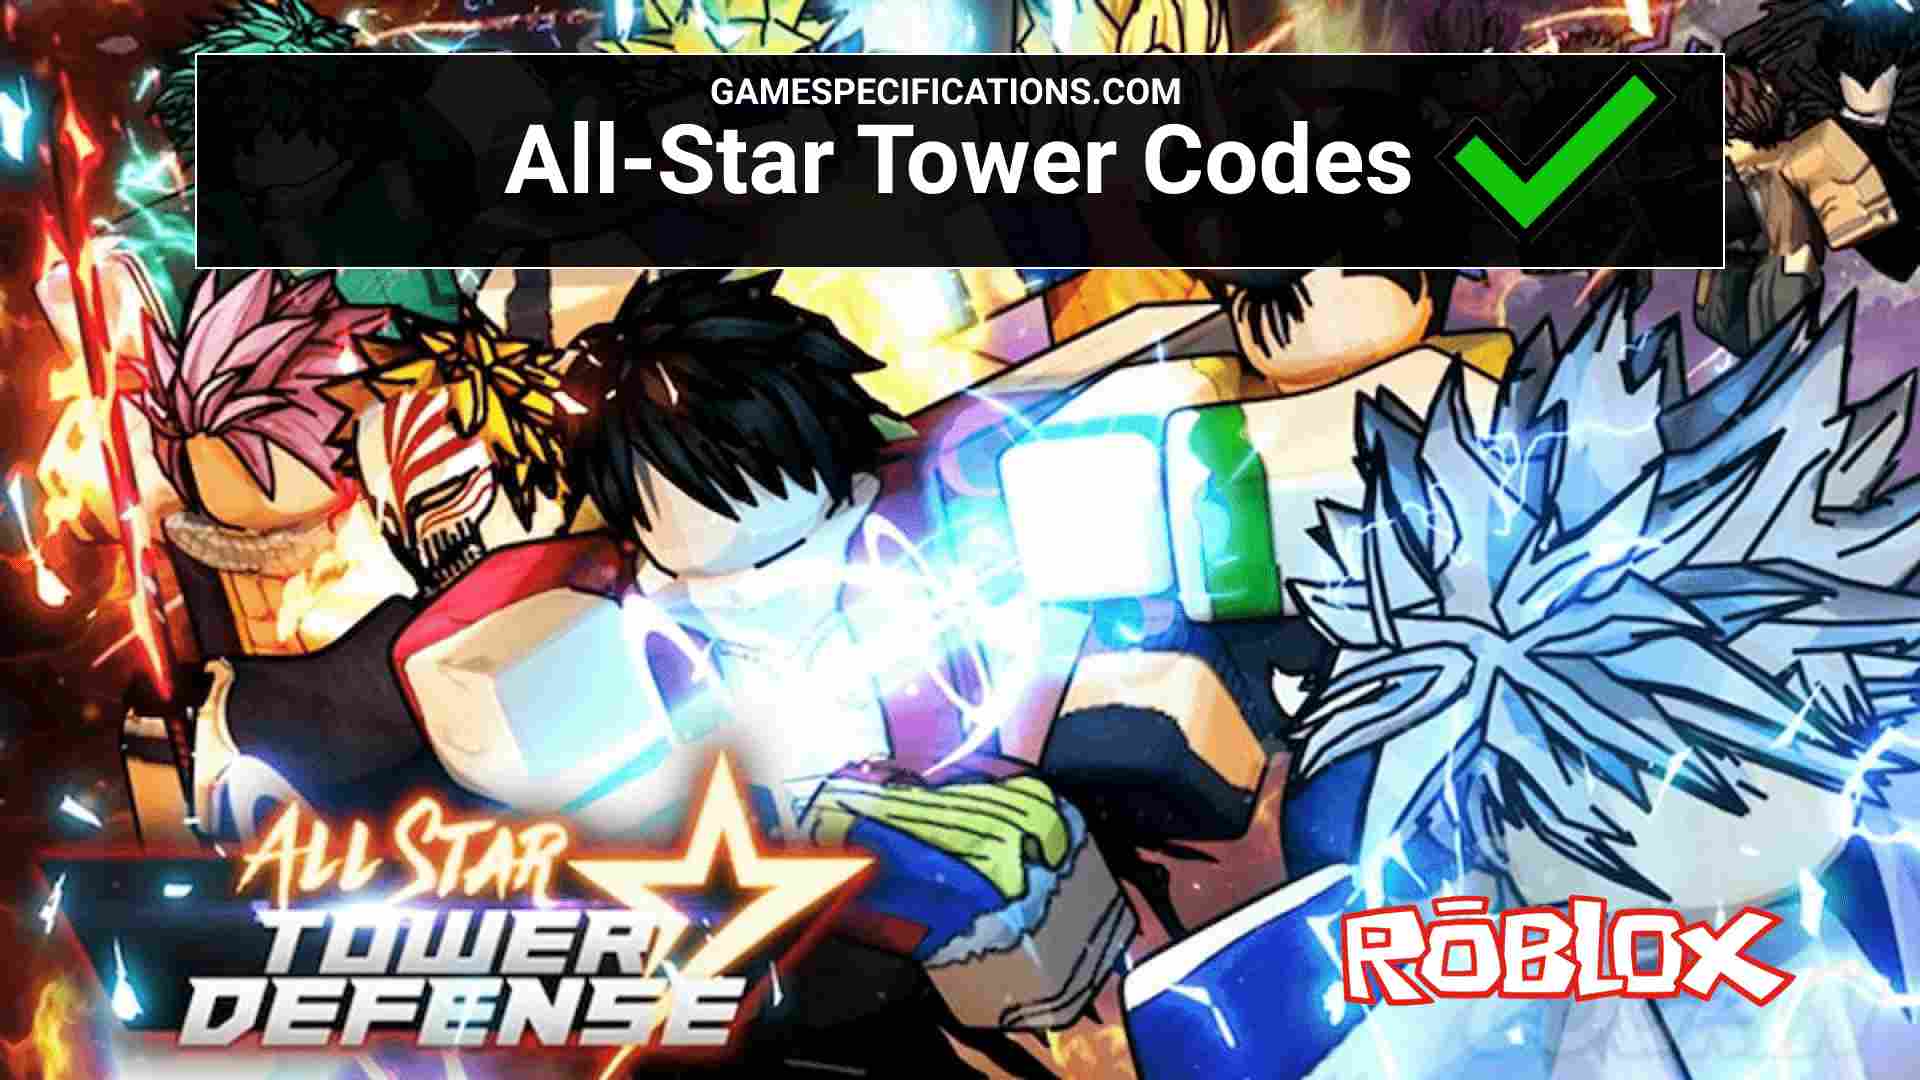 71 Roblox All Star Tower Defense Codes For Extra Gems Game Specifications - roblox textbox character limit